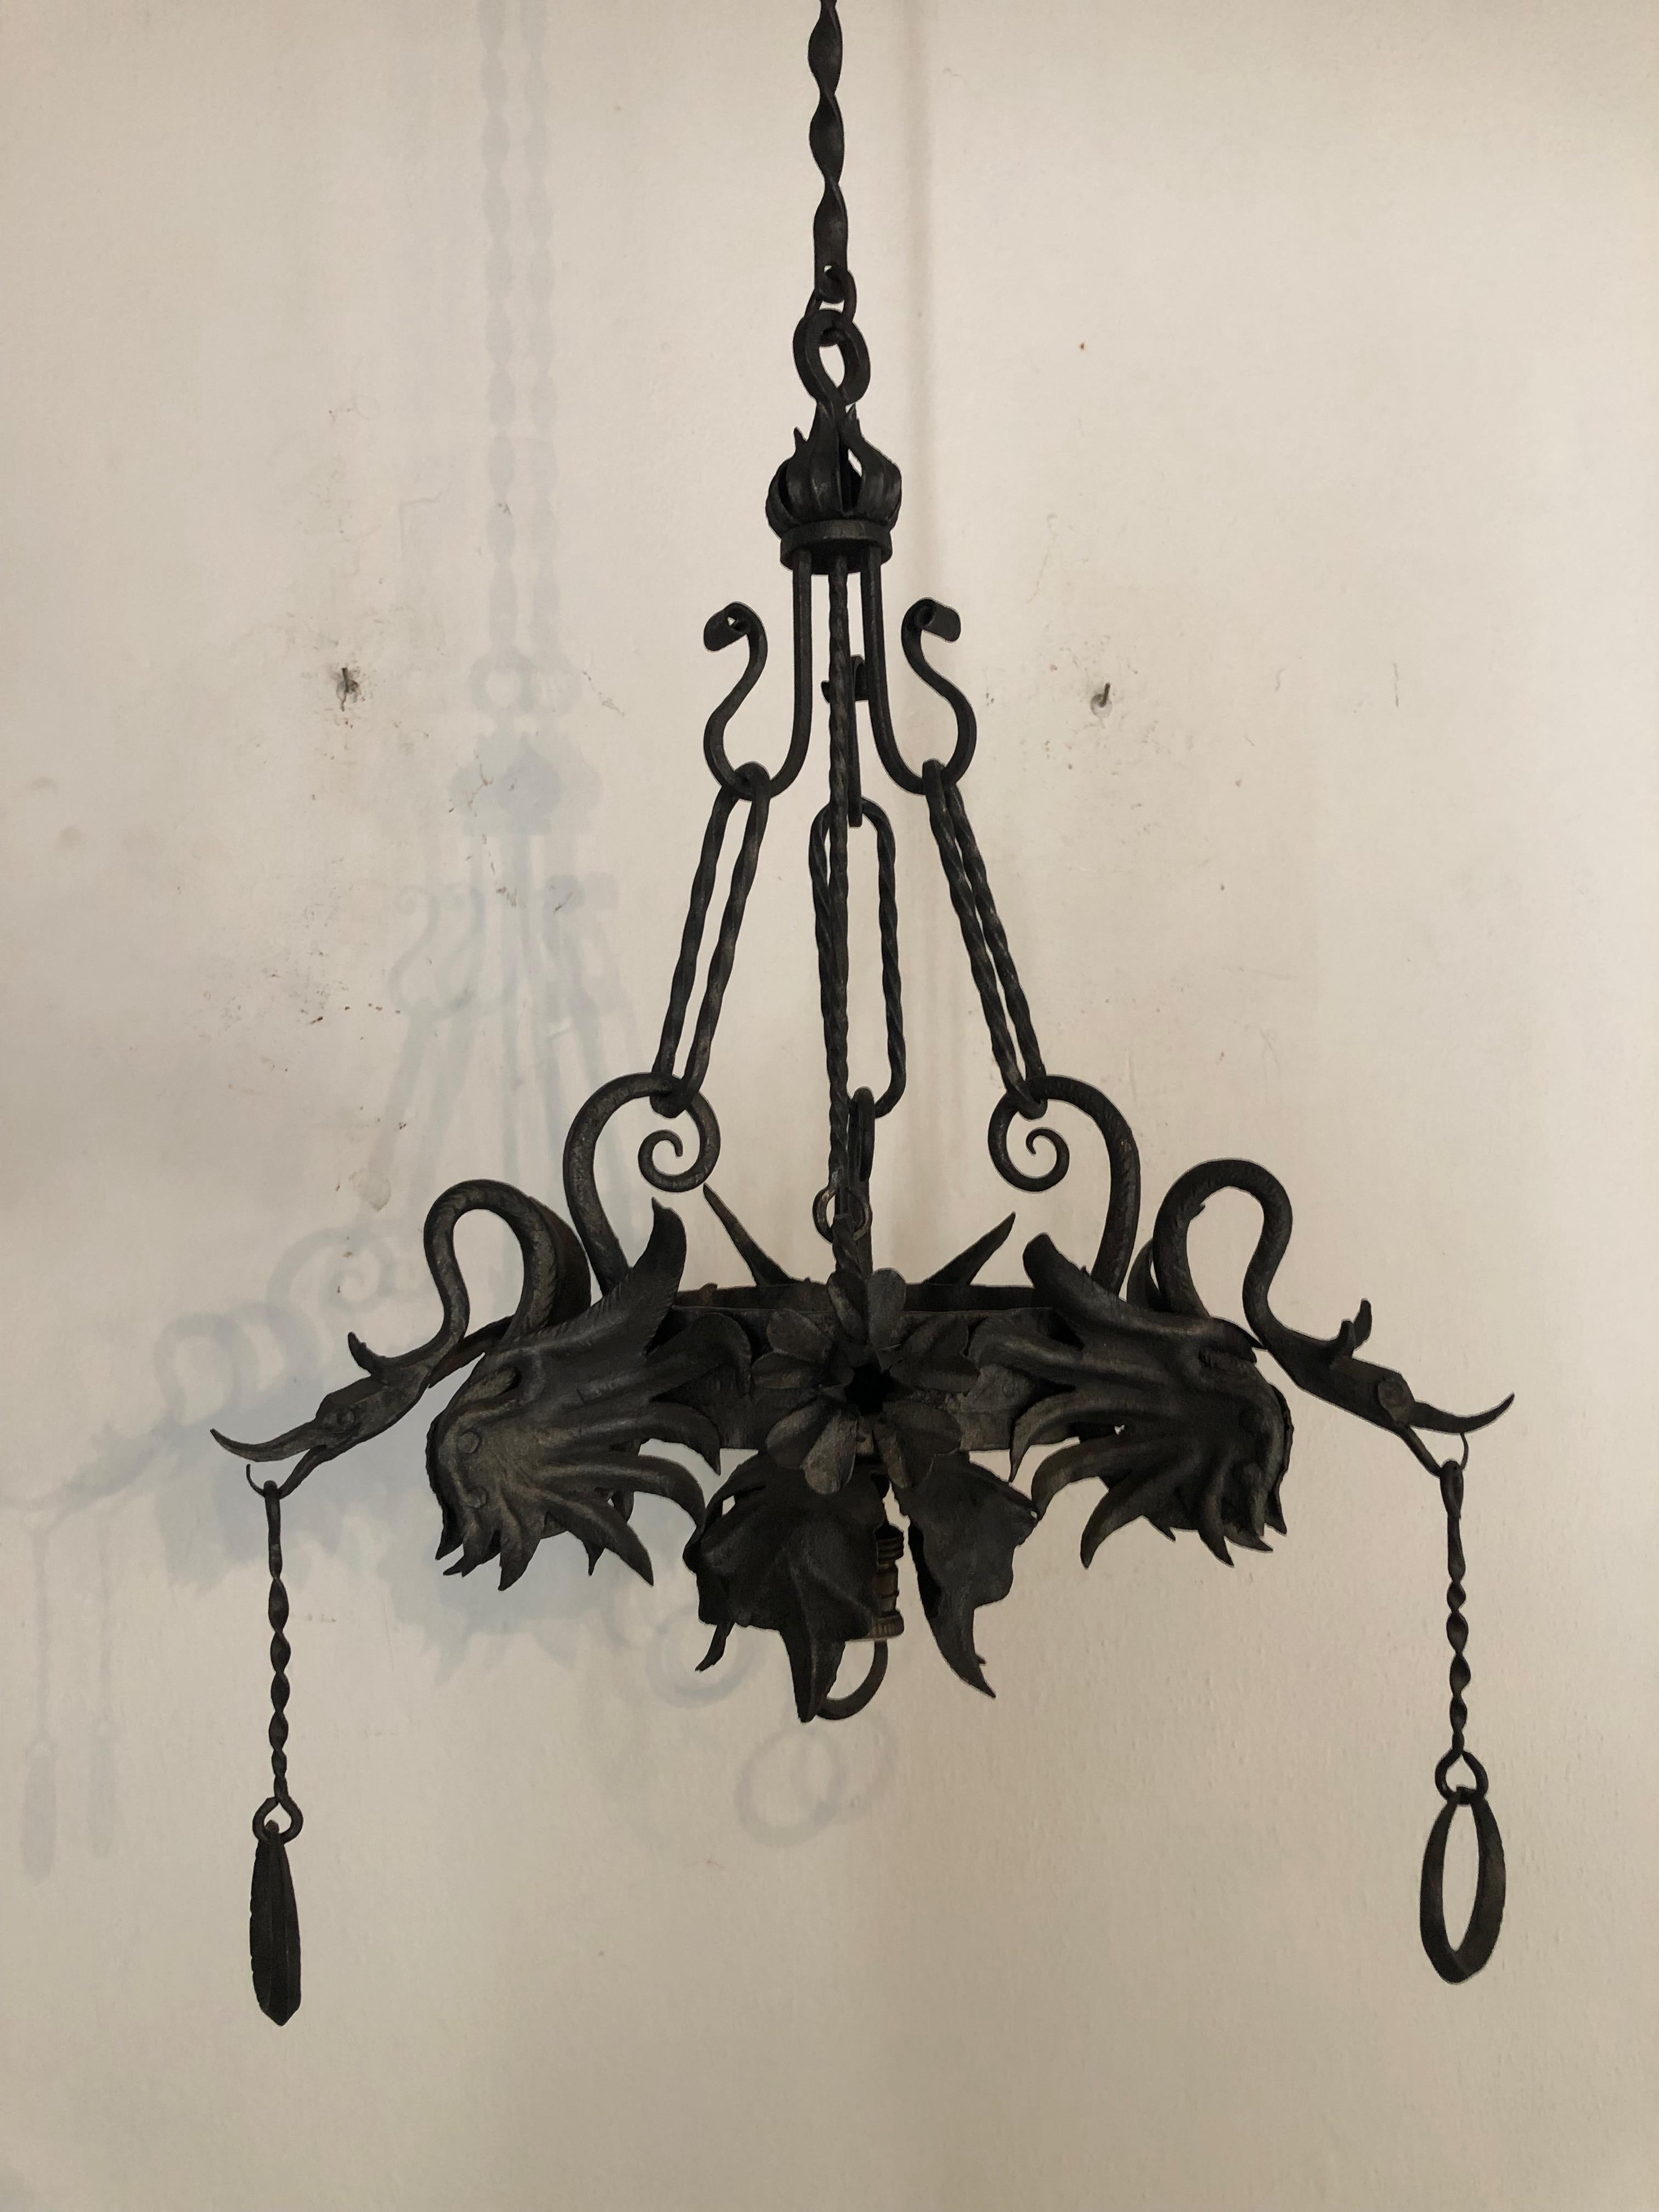 Housing one-light. Will be rewired with certified US UL sockets for USA and appropriate sockets for all other countries and ready to hang. Detachable chains. Detailed dragons and flowers. Huge canopy still intact. Wrought iron has been treated to